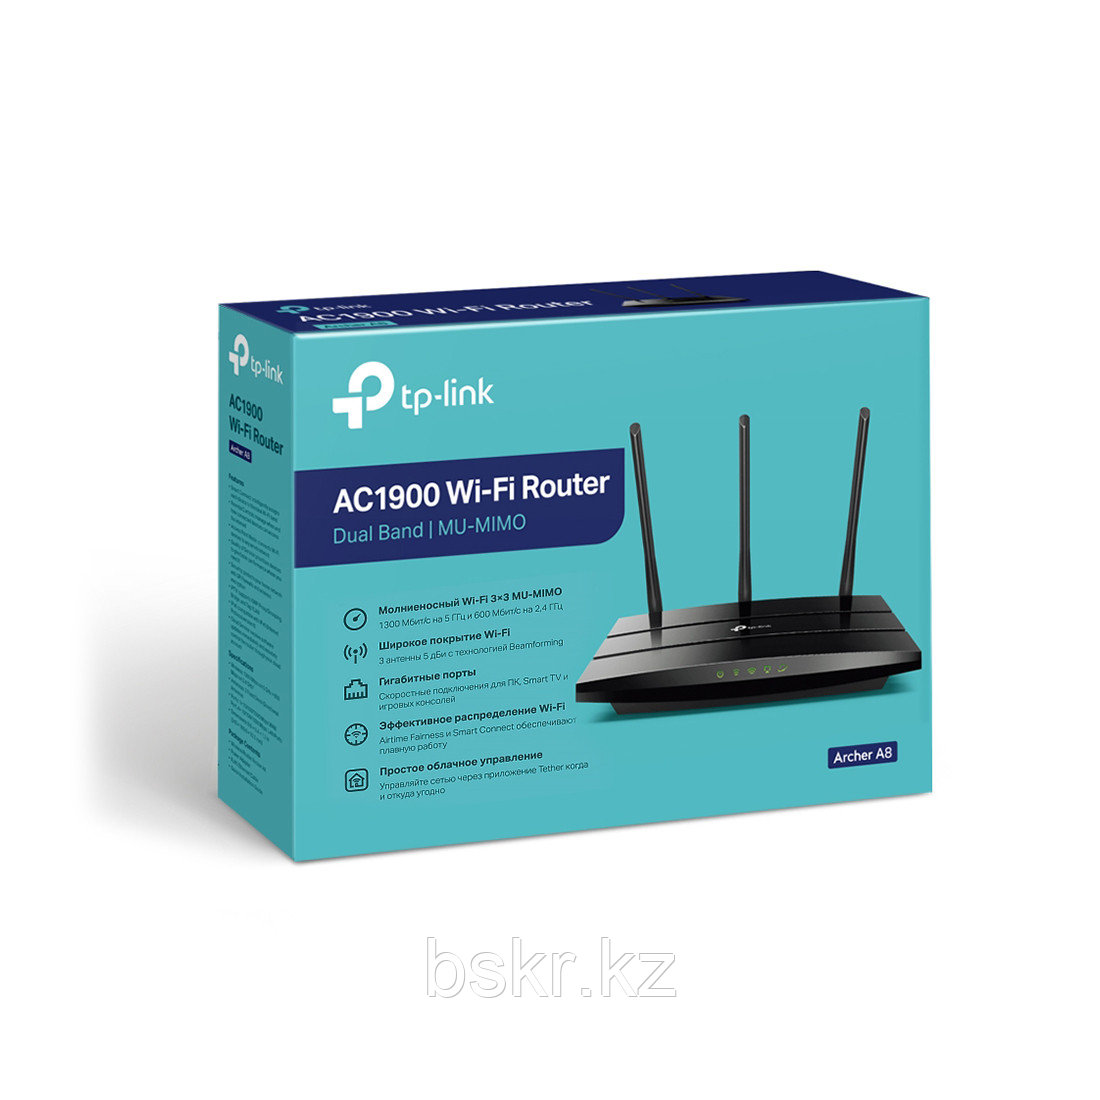 Маршрутизатор TP-Link Archer A8 - фото 3 - id-p108241378